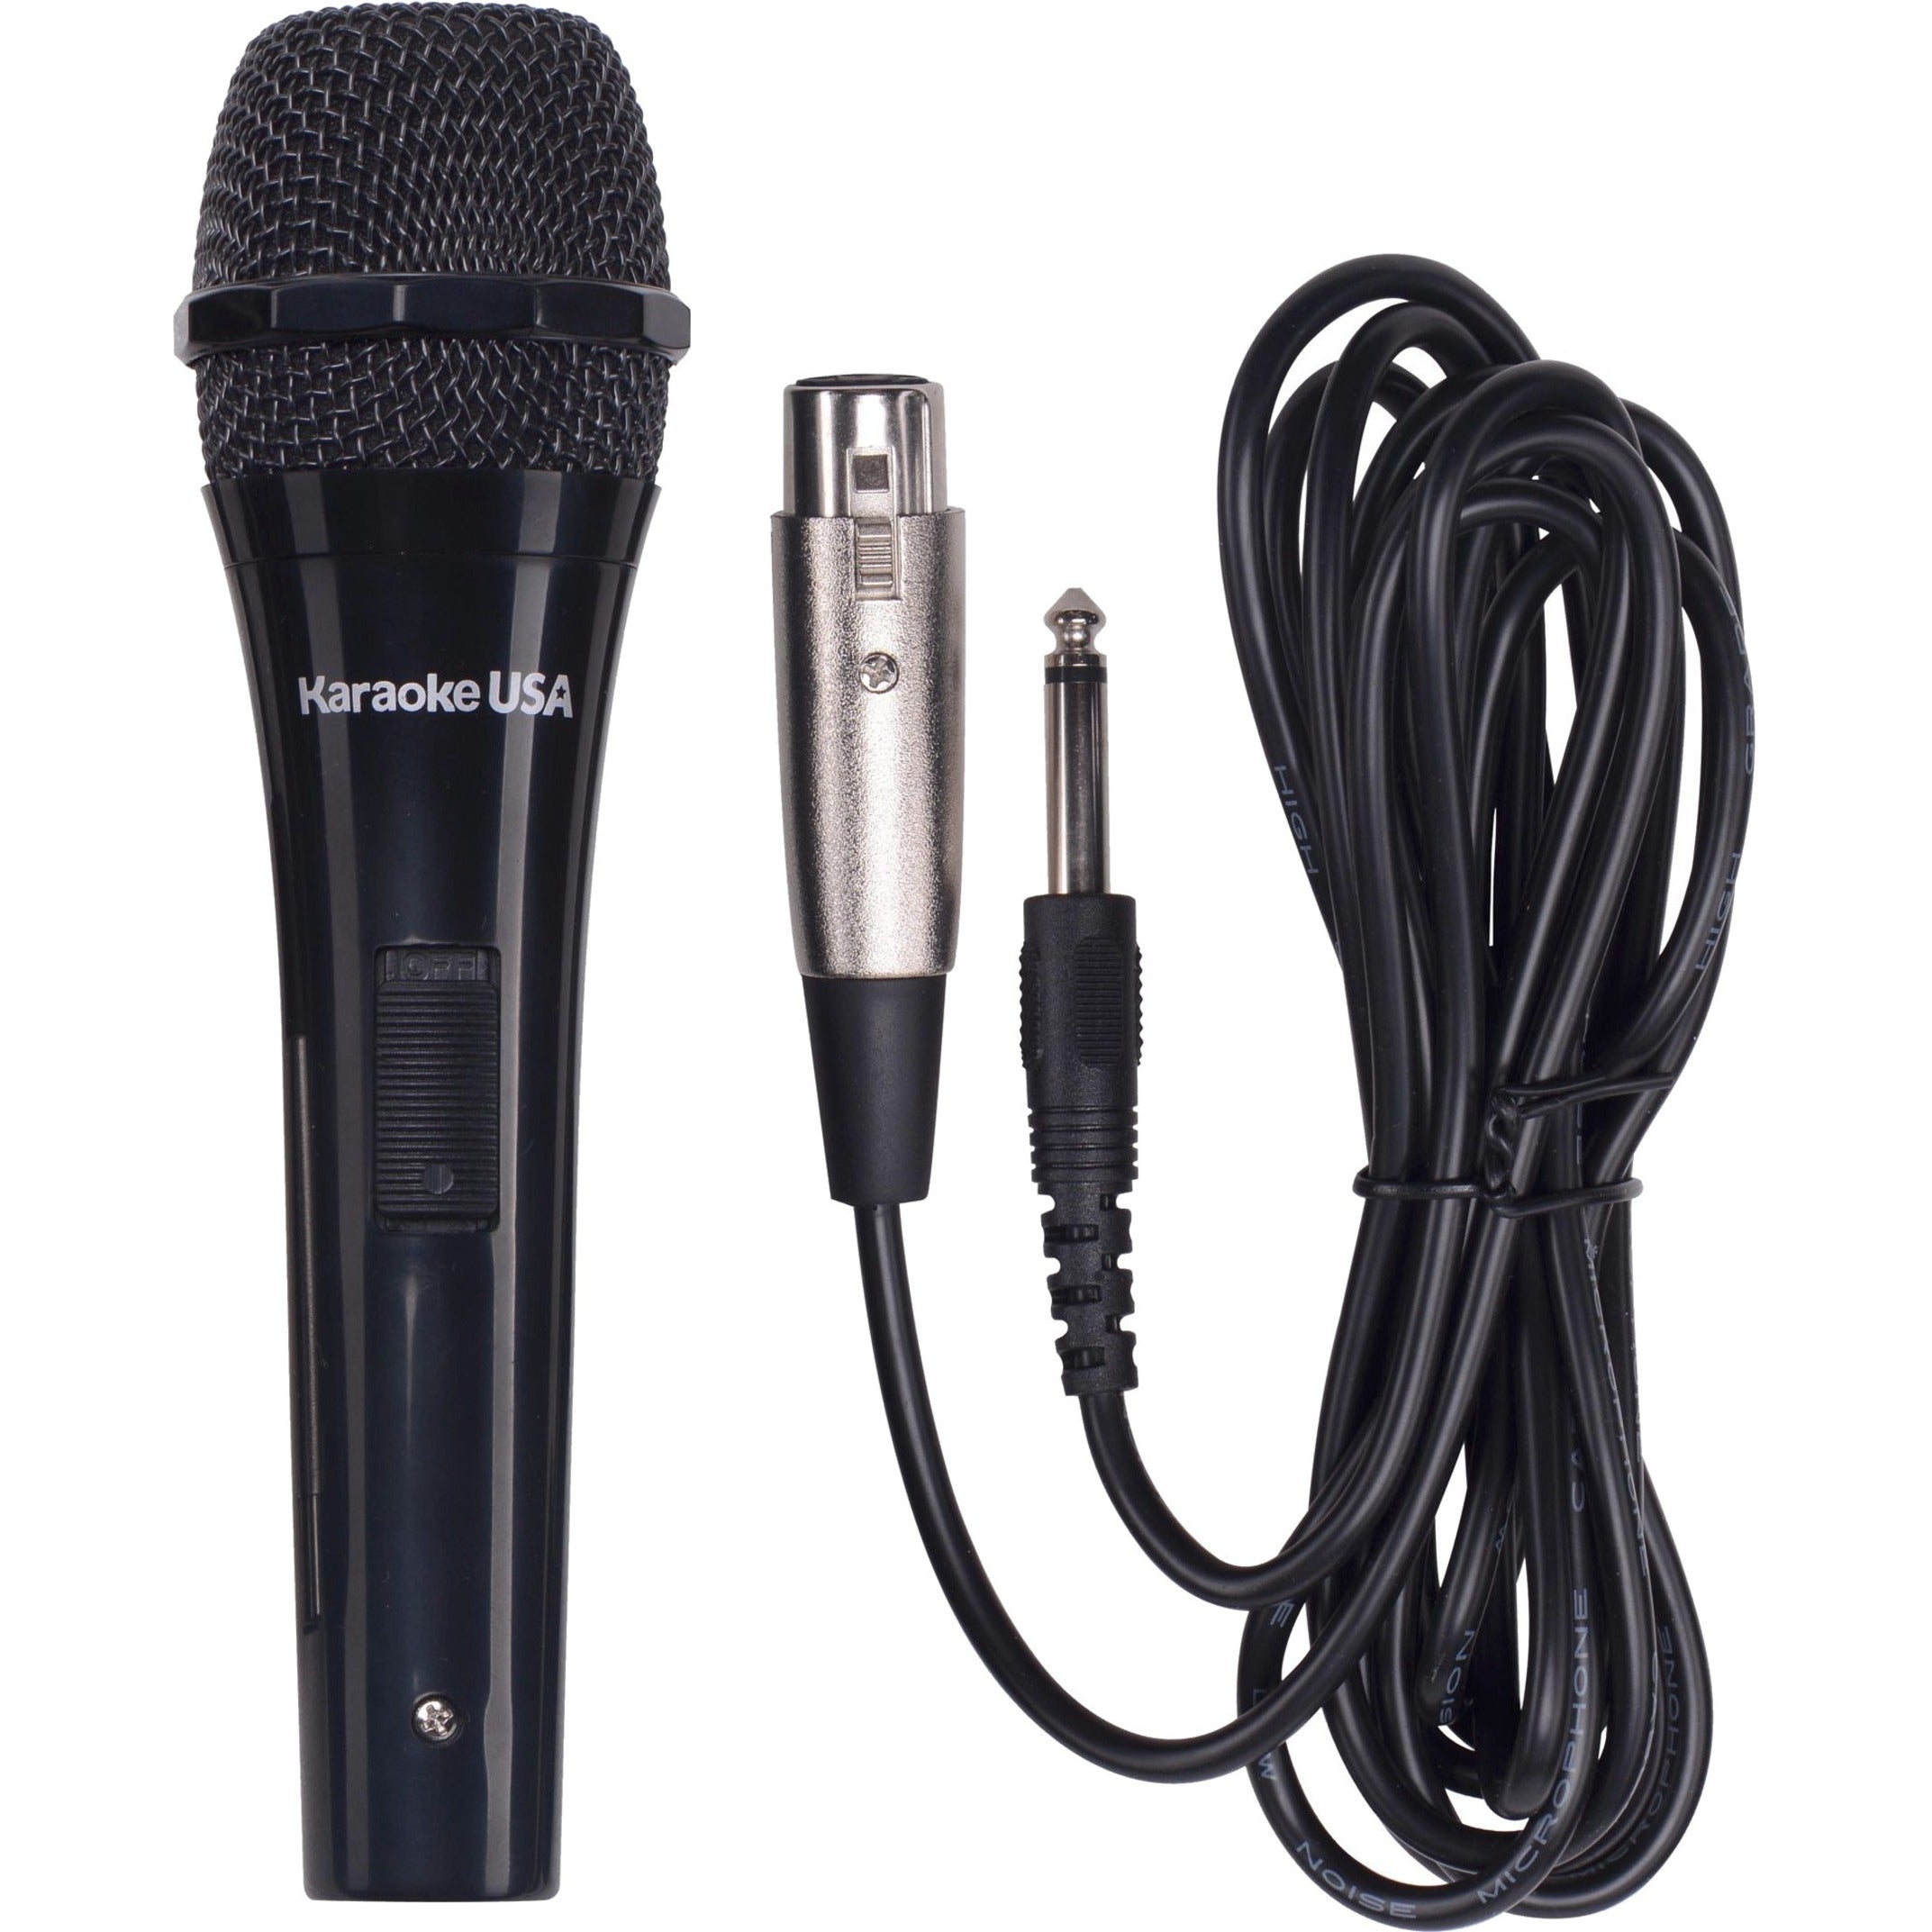 Karaoke USA M189 Professional Dynamic Microphone (Removable Cord), Wired Cardioid Microphone for Professional Audio